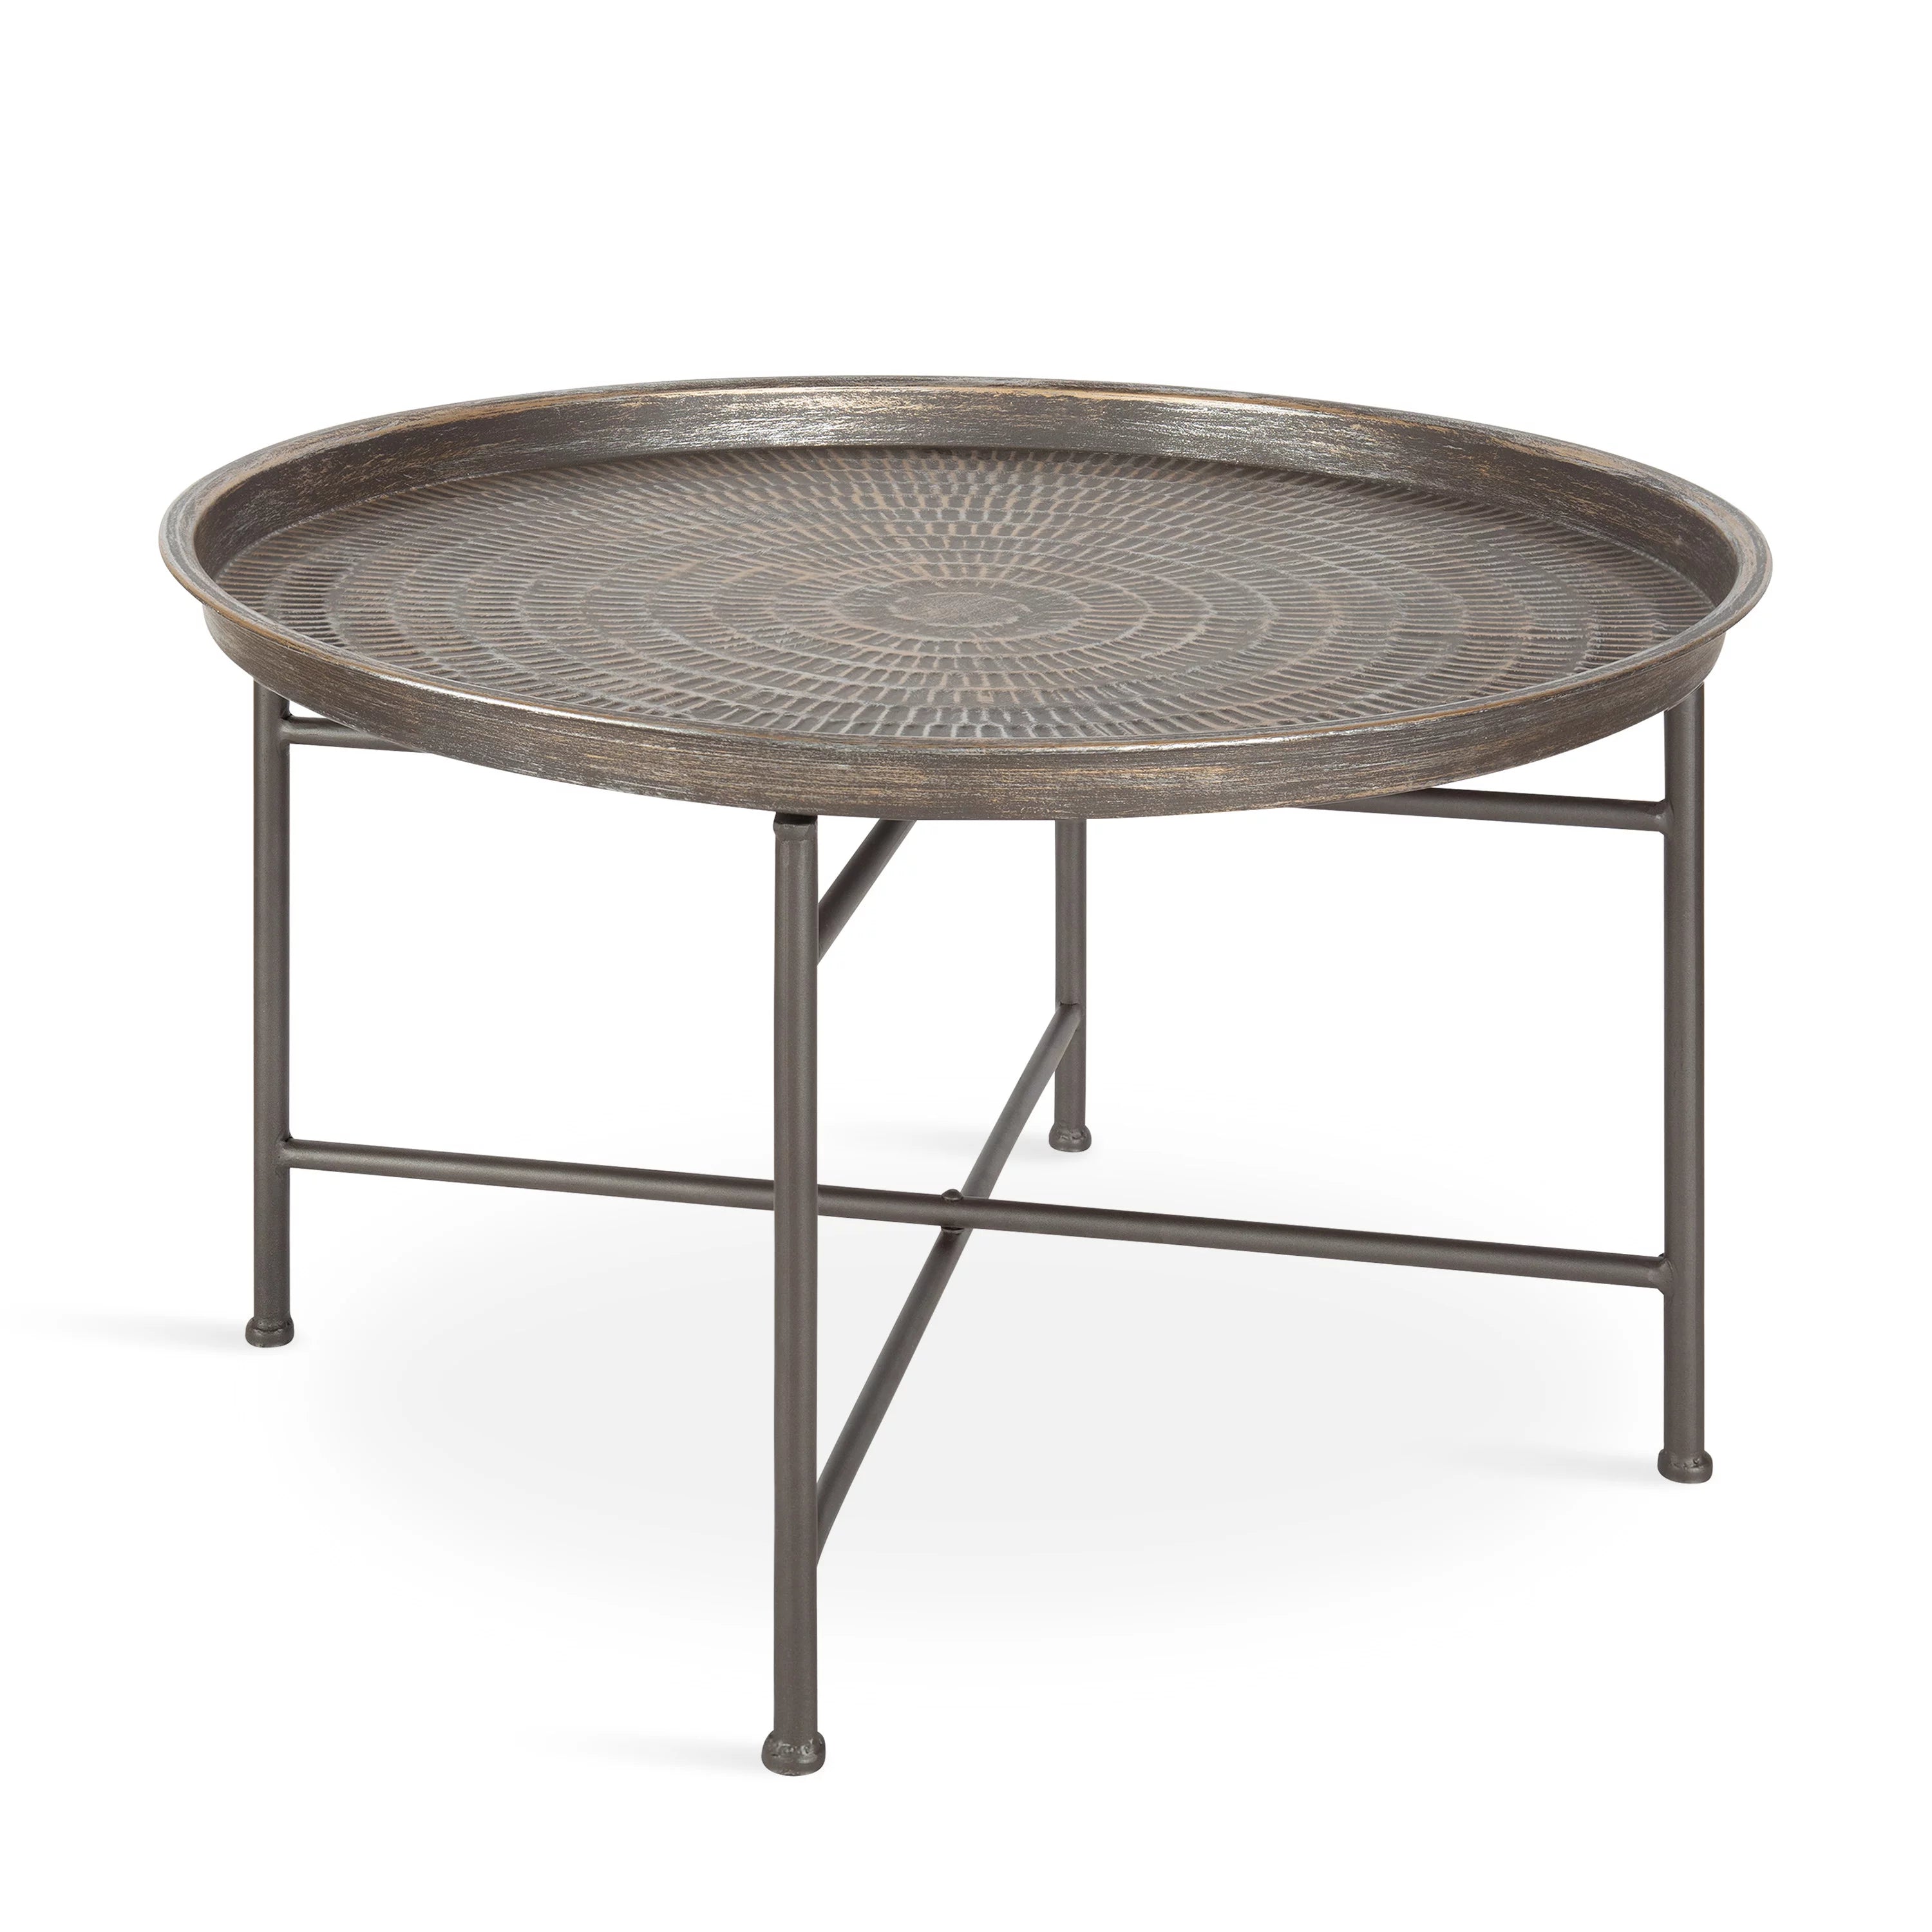 Hammered Metal Tray Coffee Table